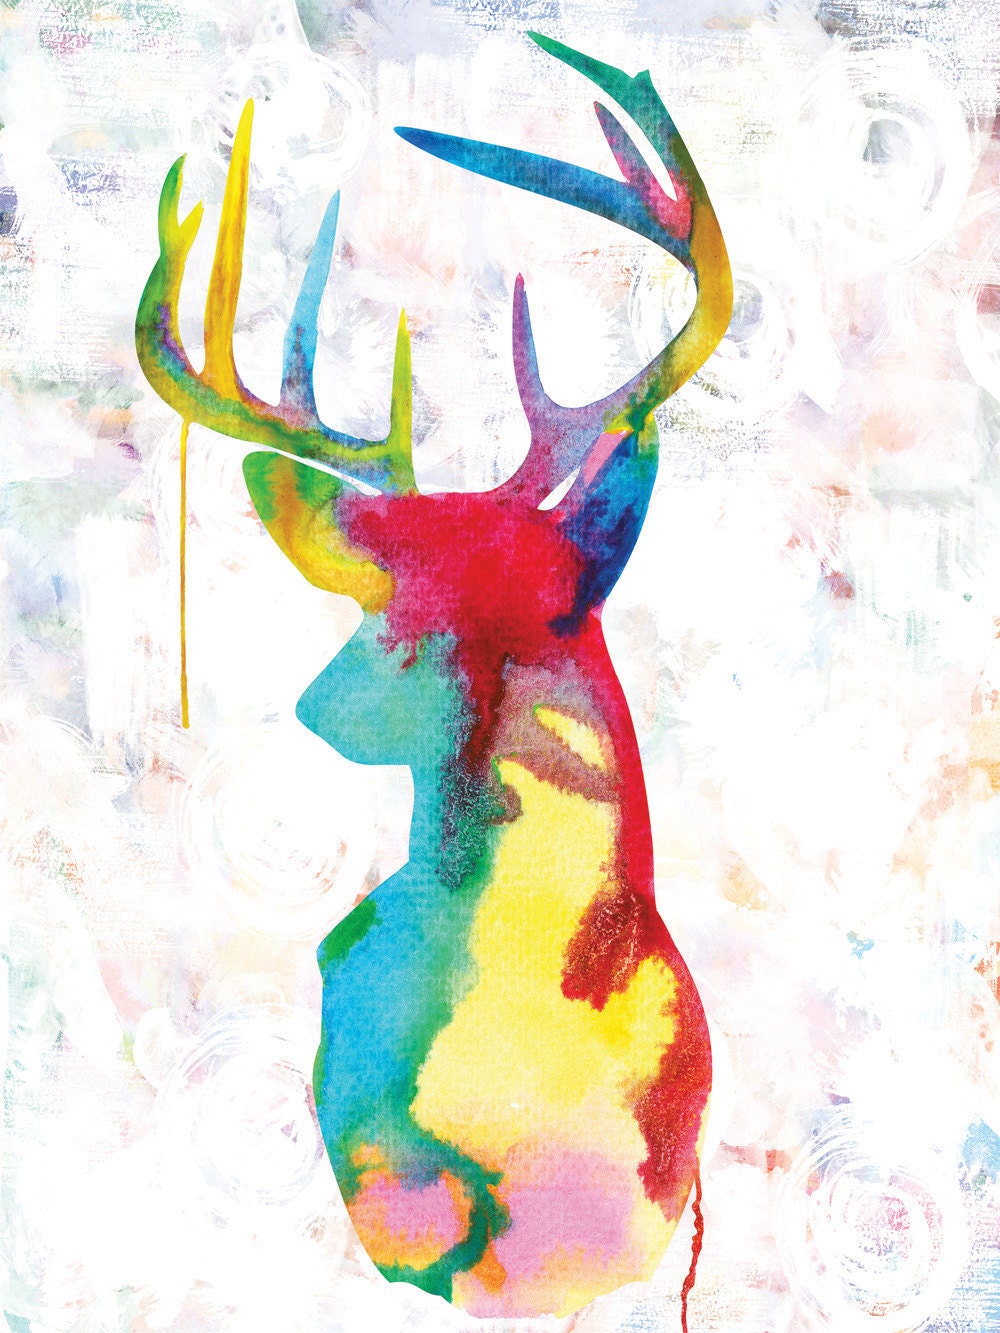 Oh Deer - Giclee print on canvas - huge 16x20 inches - ready to hang